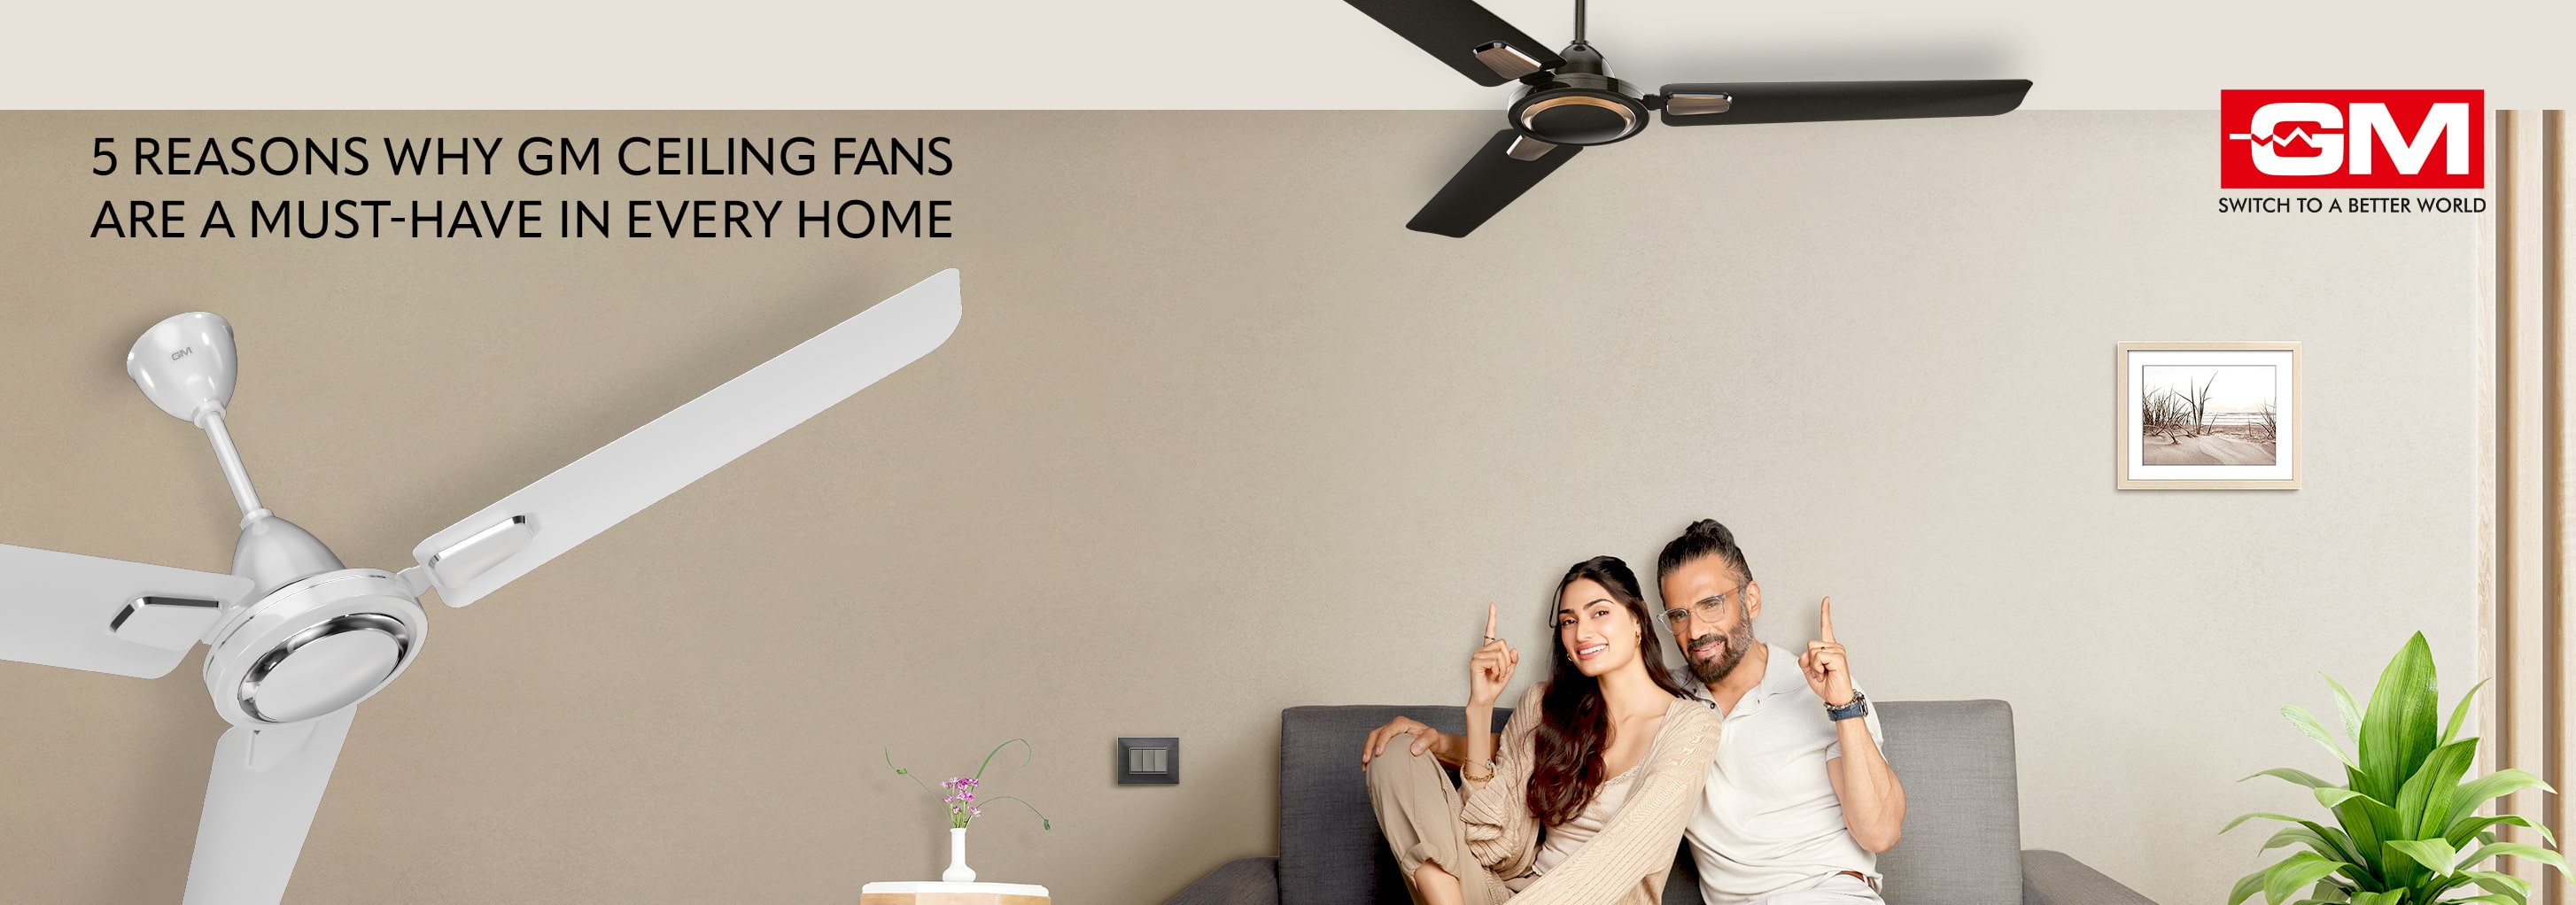 5 Reasons Why Ceiling Fans are a Must-Have in Every Home